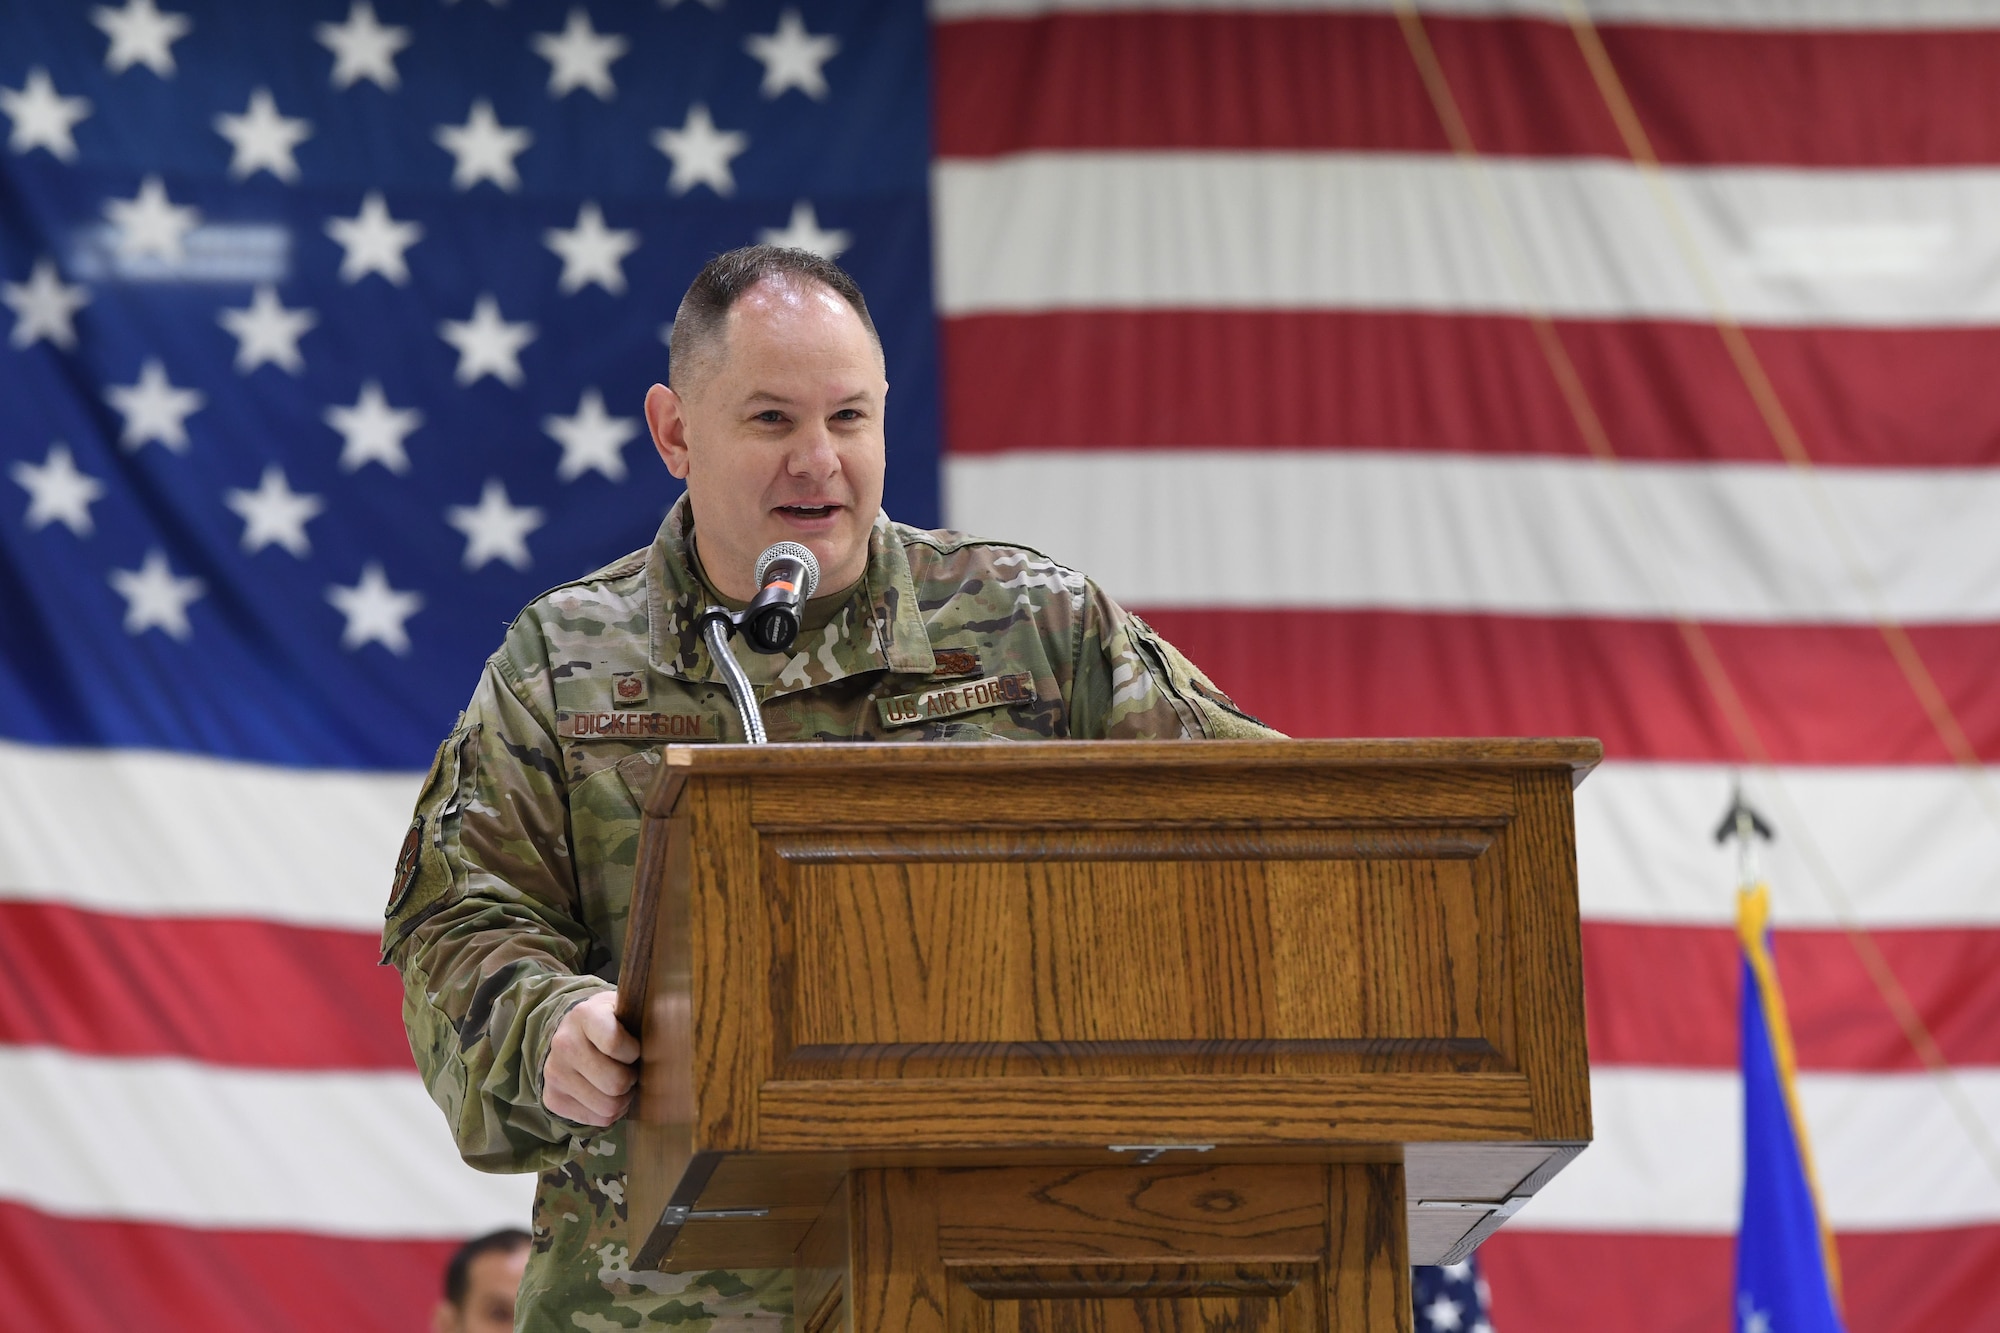 Maj. Matthew Dickerson, 434th Aircraft Maintenance Squadron commander, gives a speech after a change of command ceremony with the outgoing commander, Lt. Col. John Valdes. Dickerson moved into the role after three years as commander of the 434th Maintenance Operations Section.